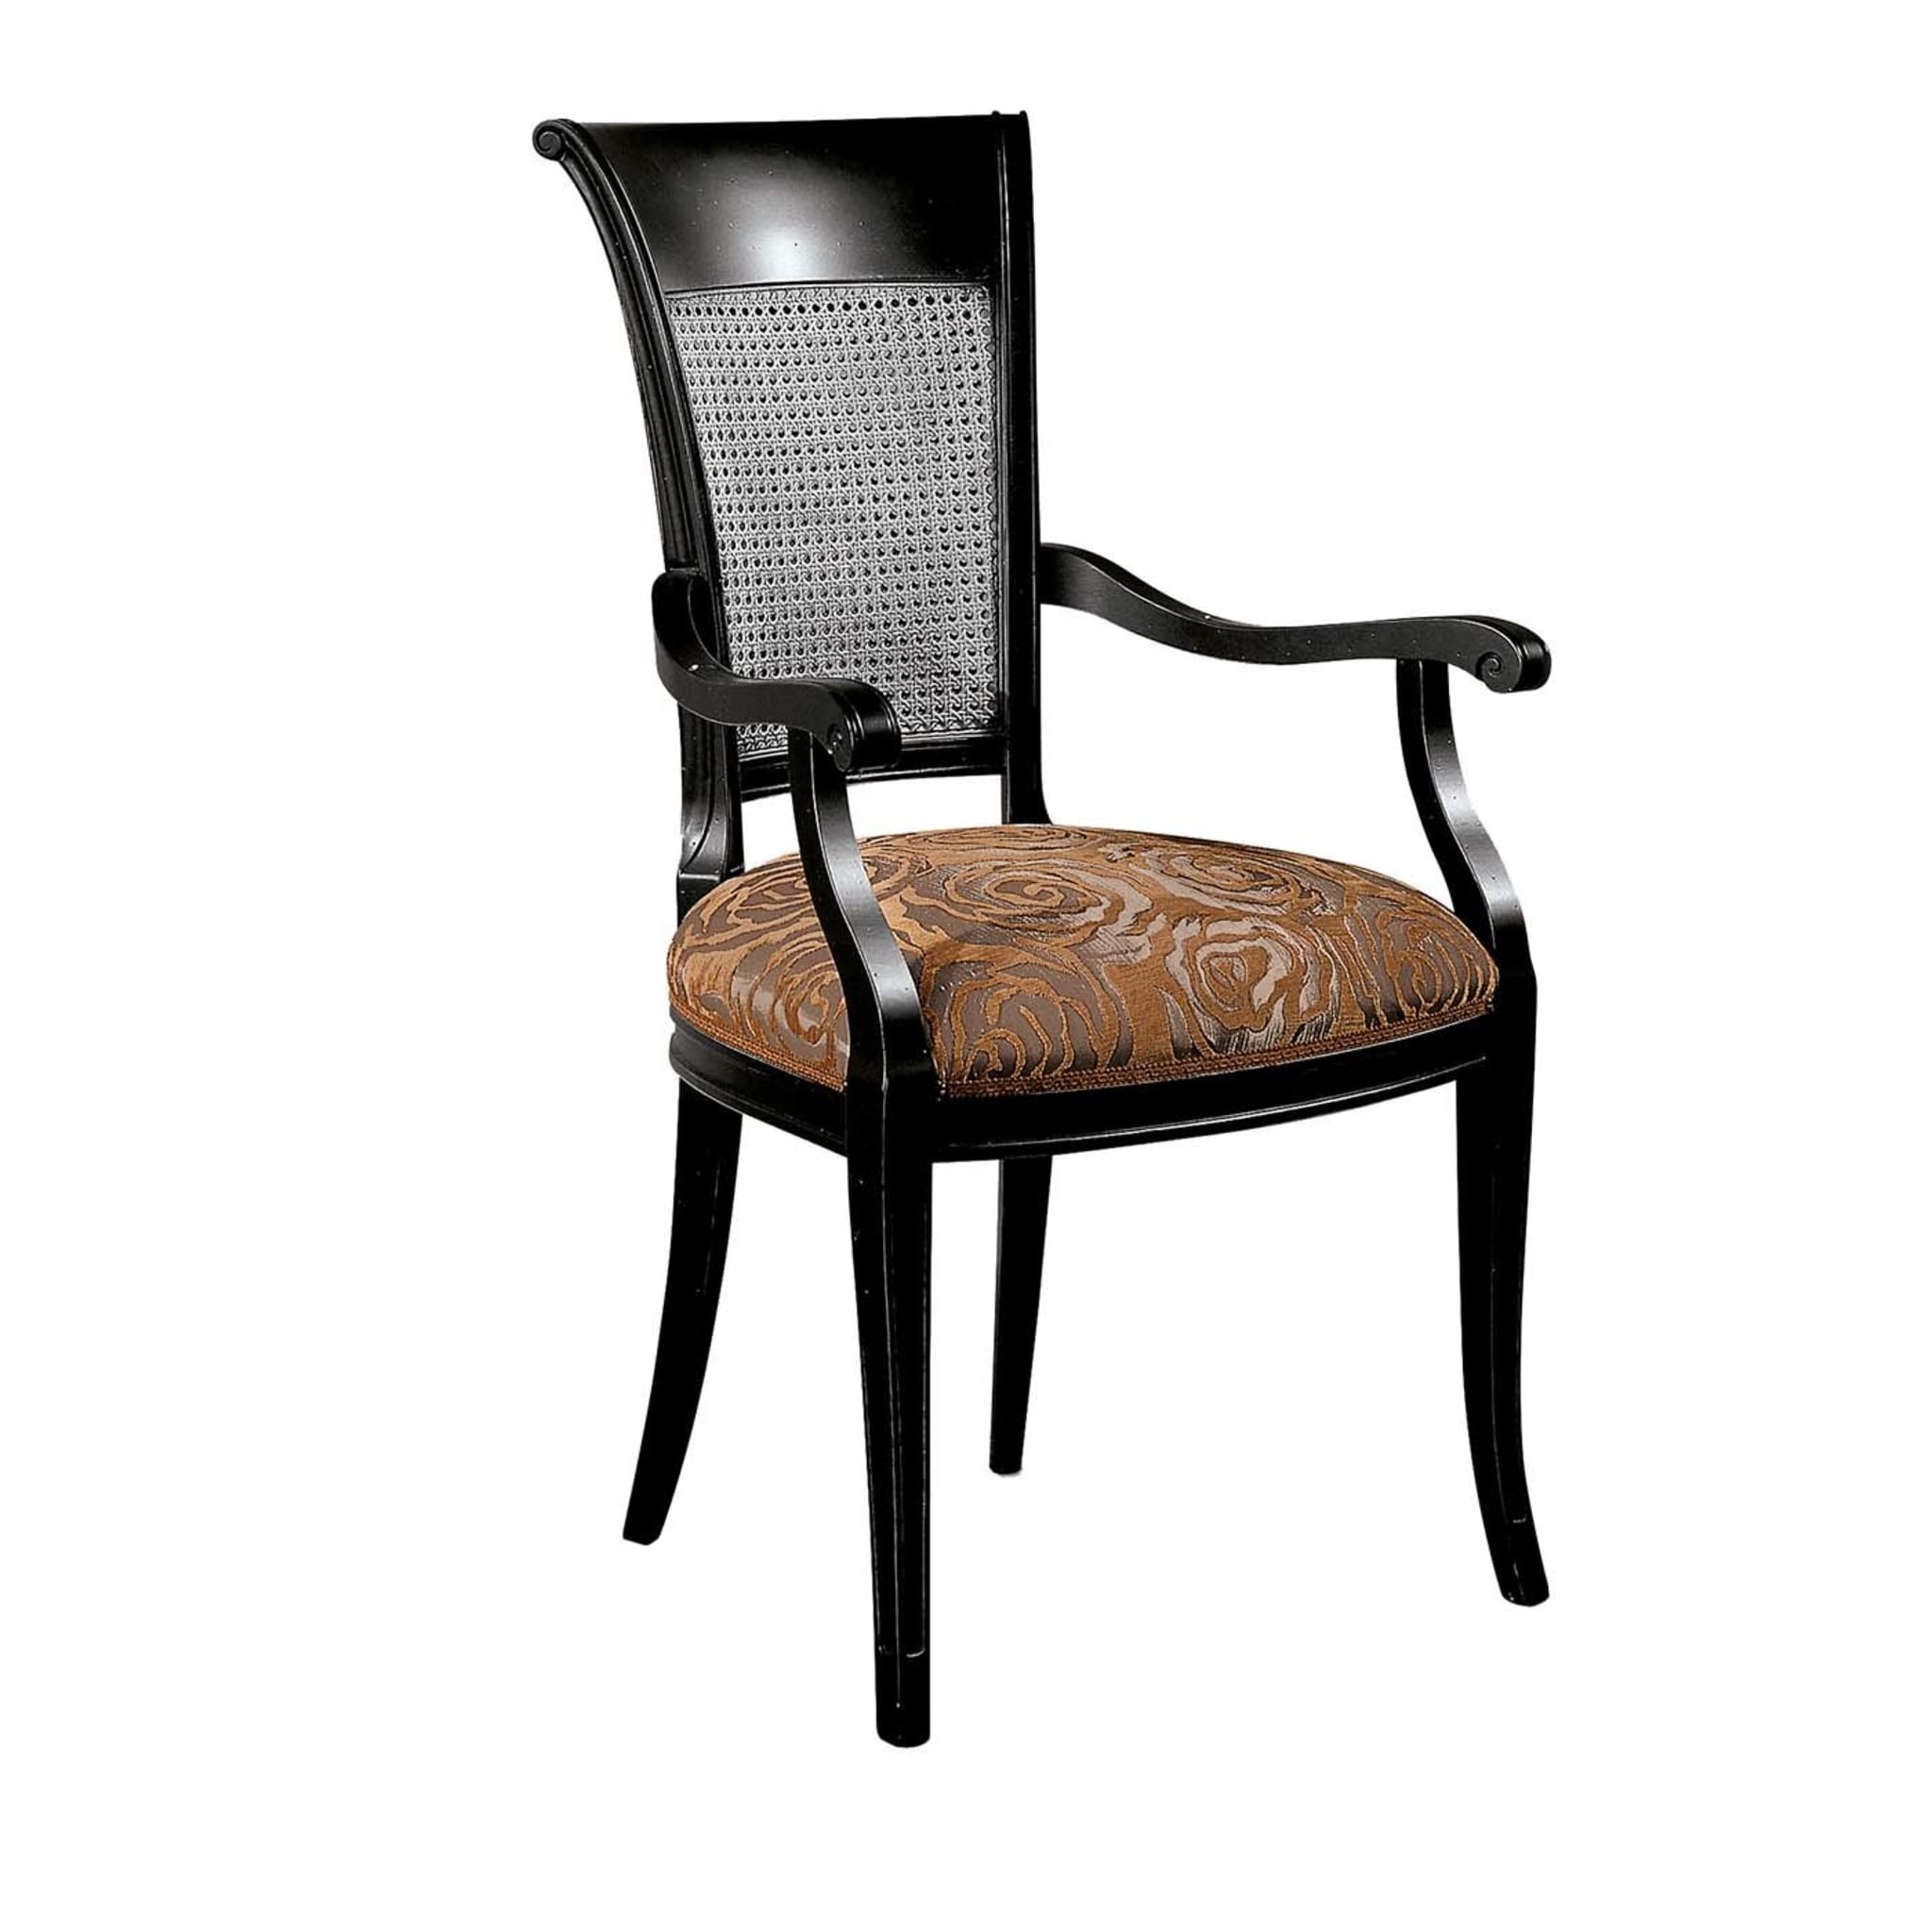 Capotavola Viennese Cane Chair with Armrests - Main view